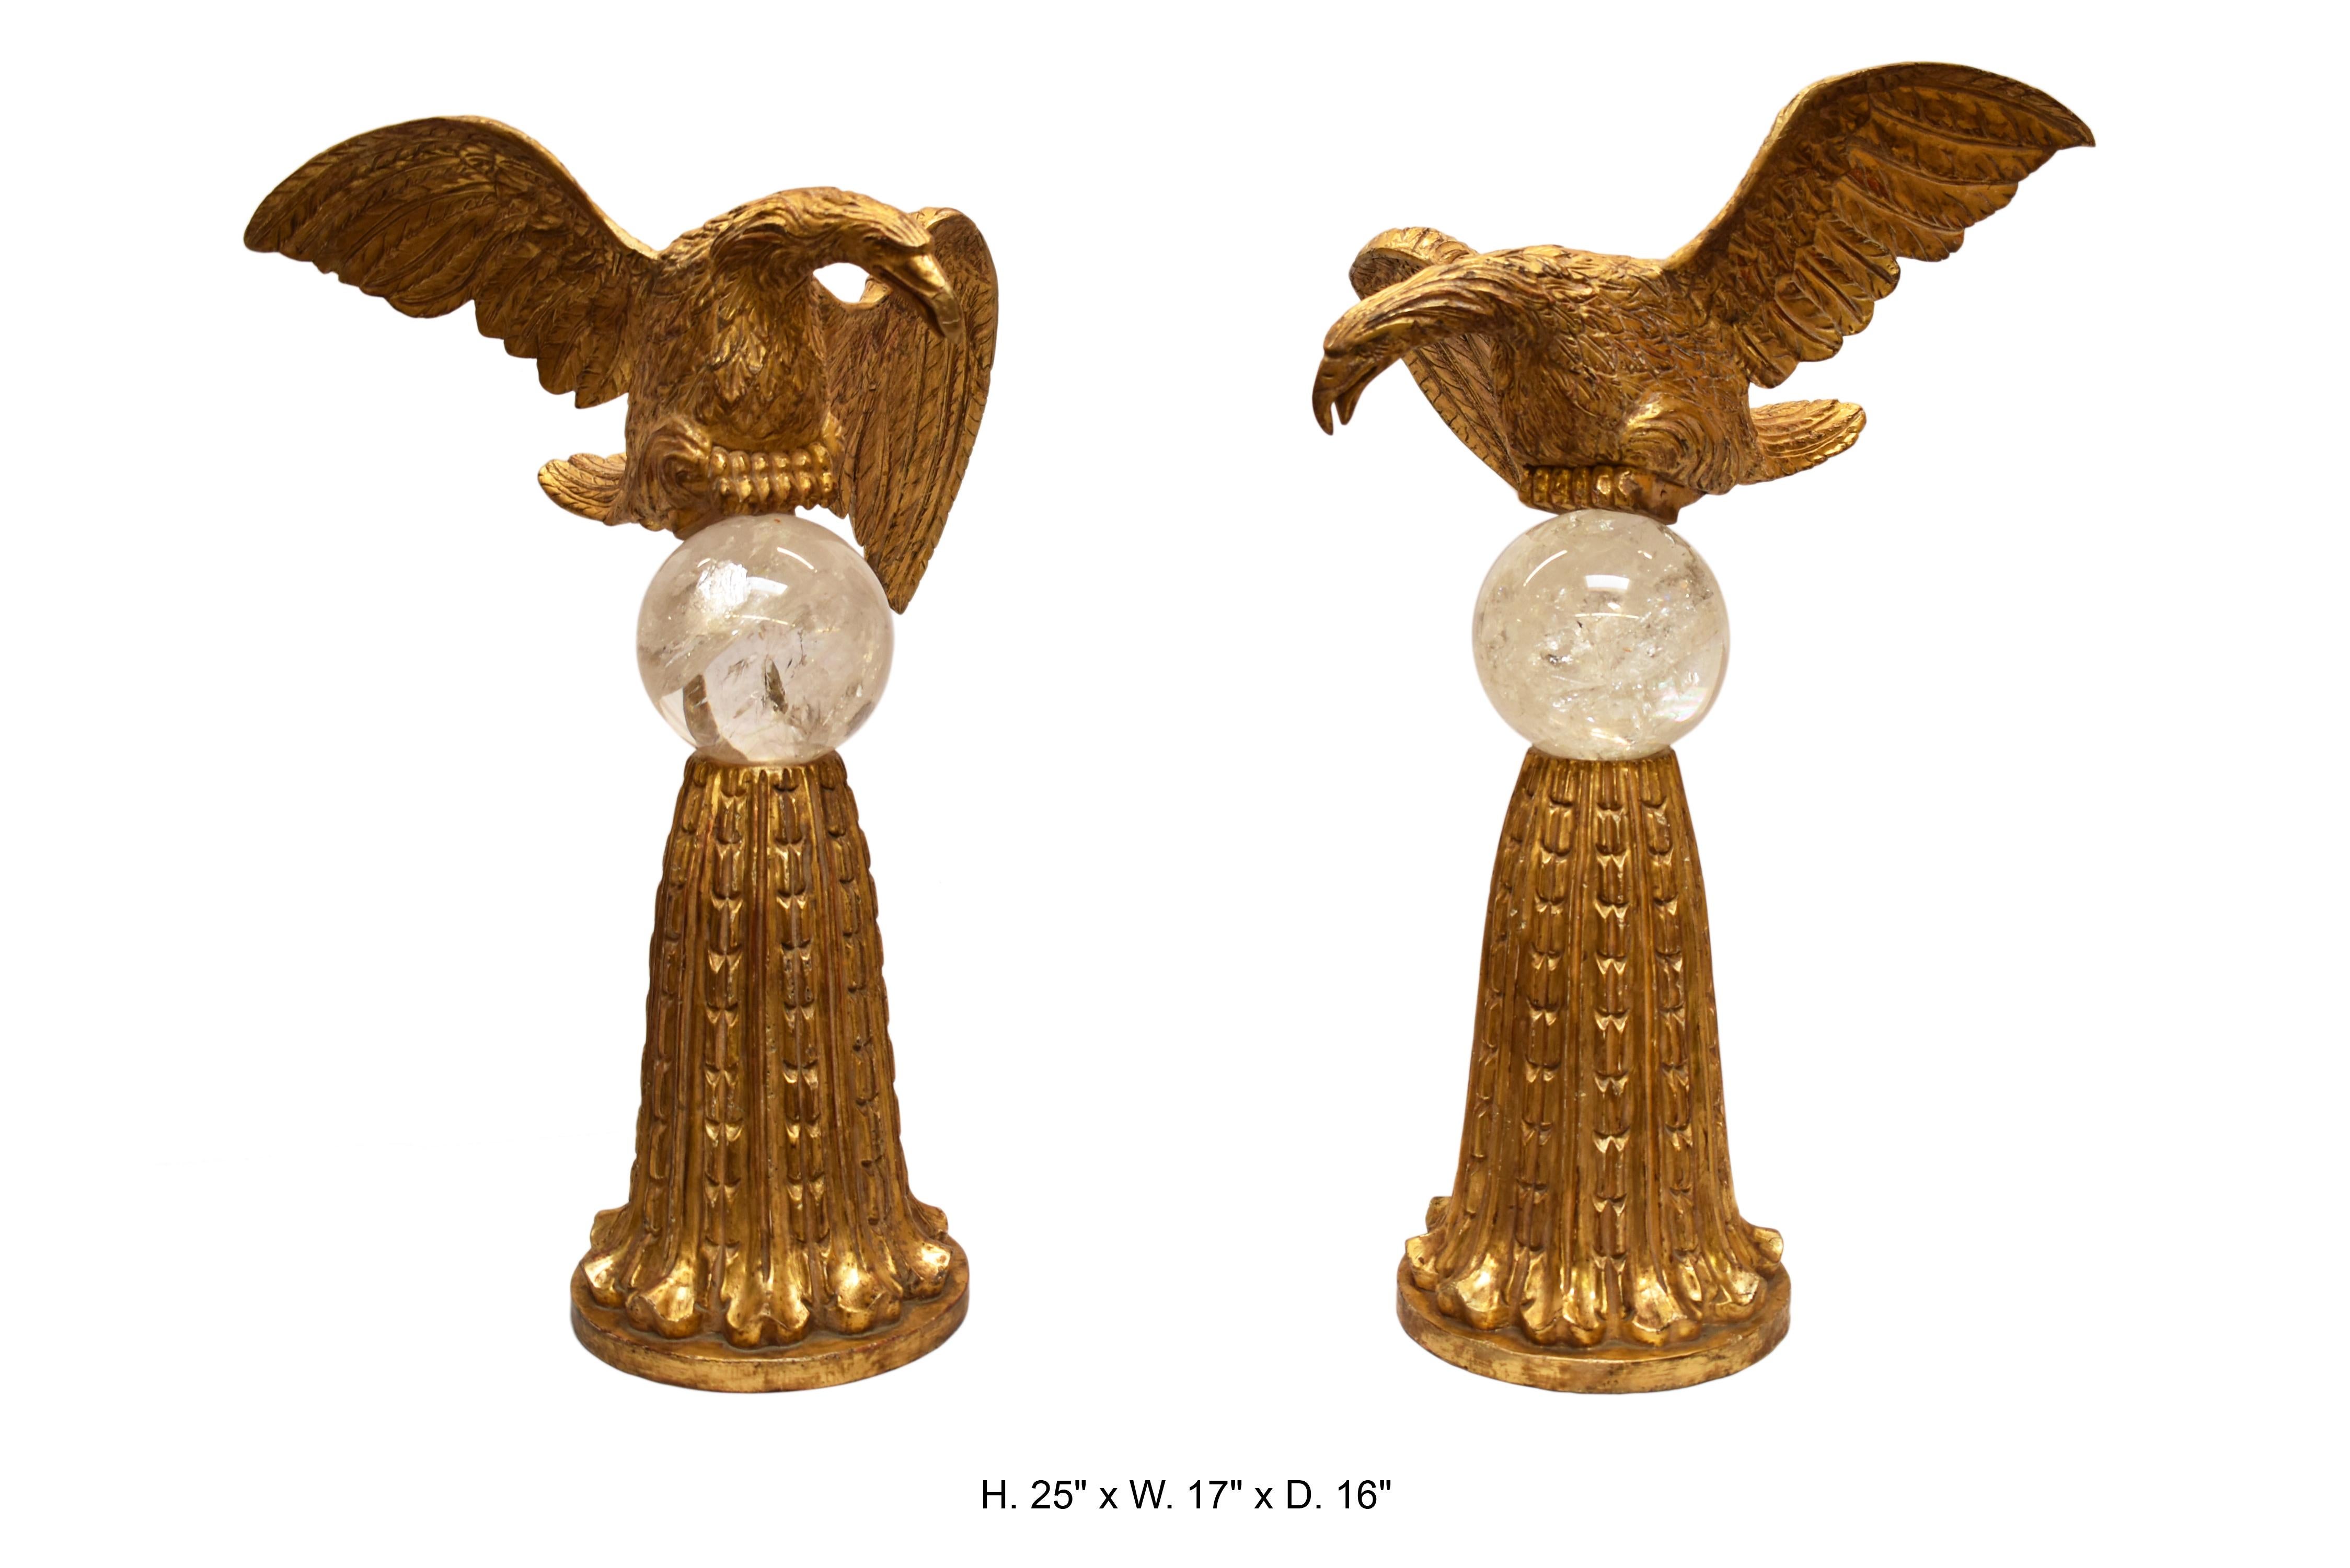 Opposing pair of finely carved giltwood eagles on large rock crystal spheres resting on tole carved giltwood bases with acanthus motif.

Measures: H 25